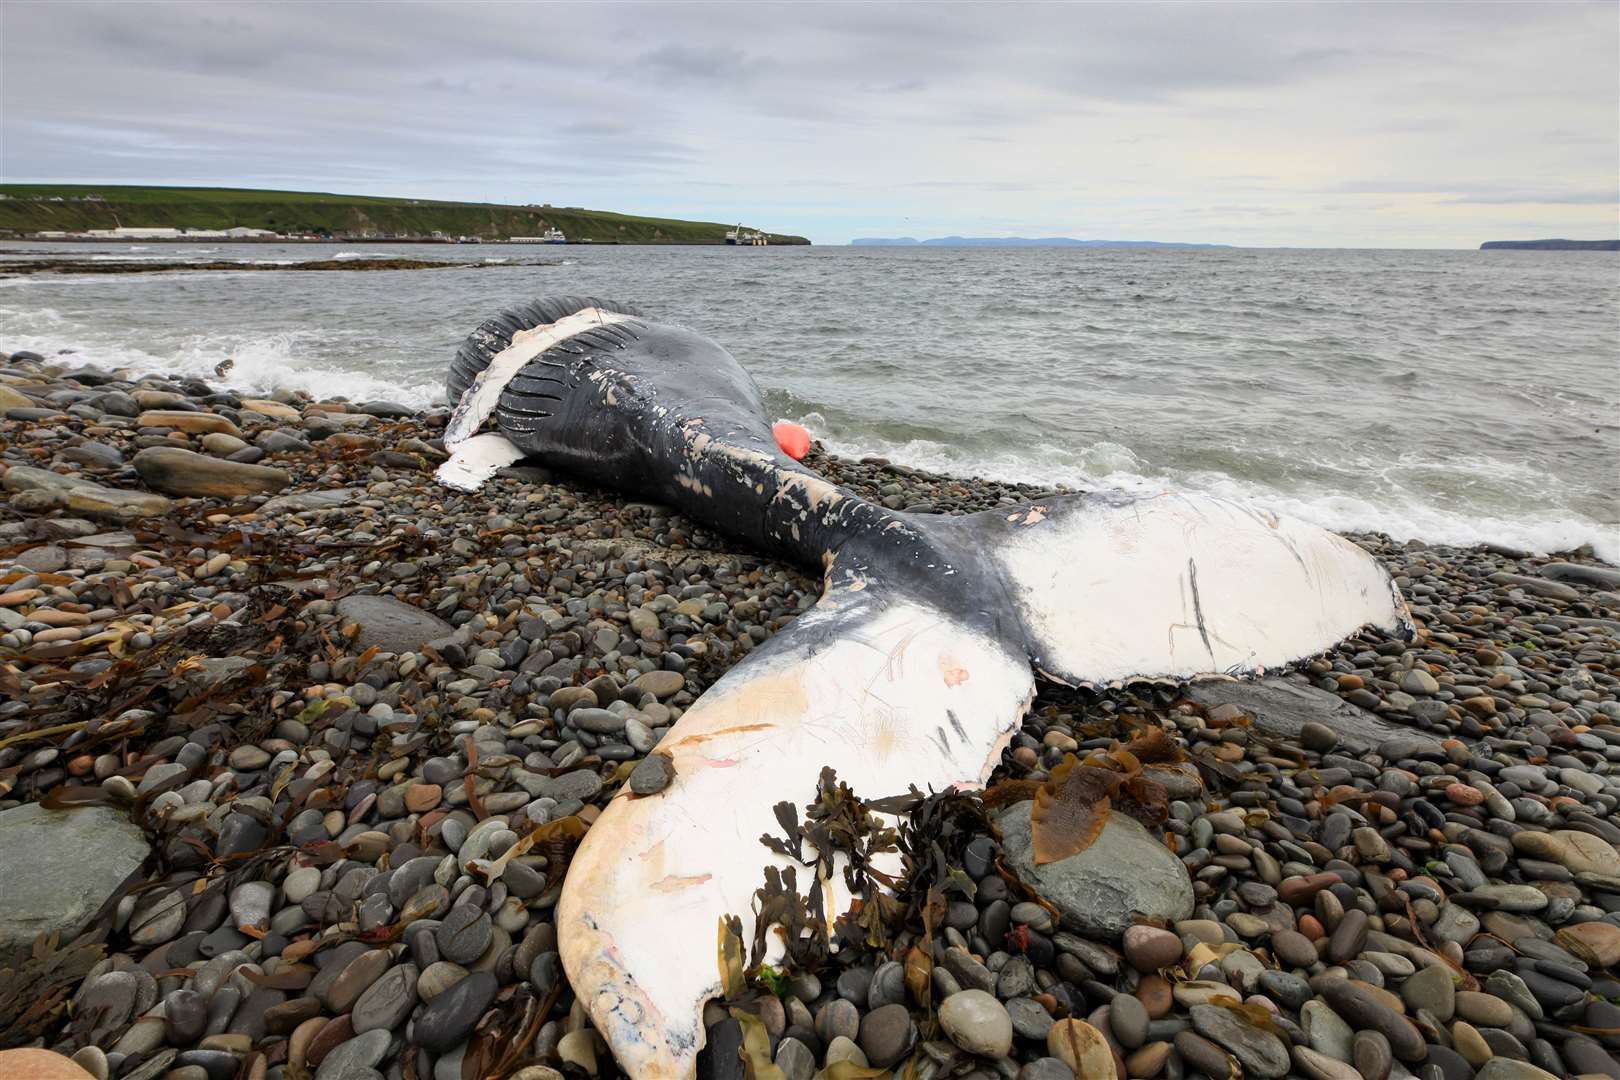 The dead humpback whale on the shore at Scrabster. Picture: Gavin Bird